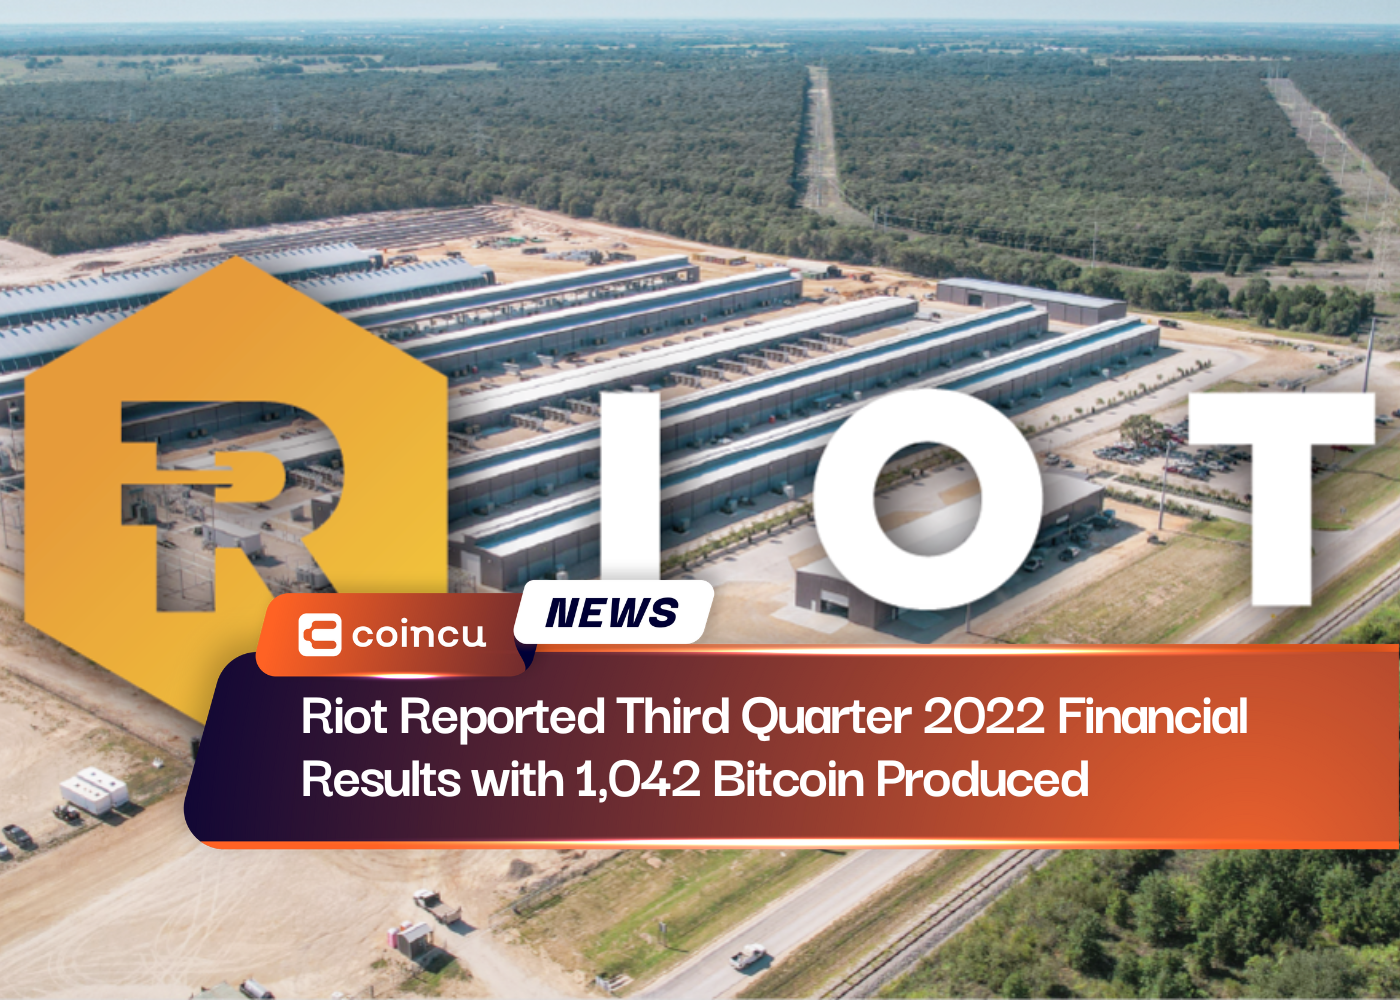 Riot Reported Third Quarter 2022 Financial Results with 1,042 Bitcoin Produced